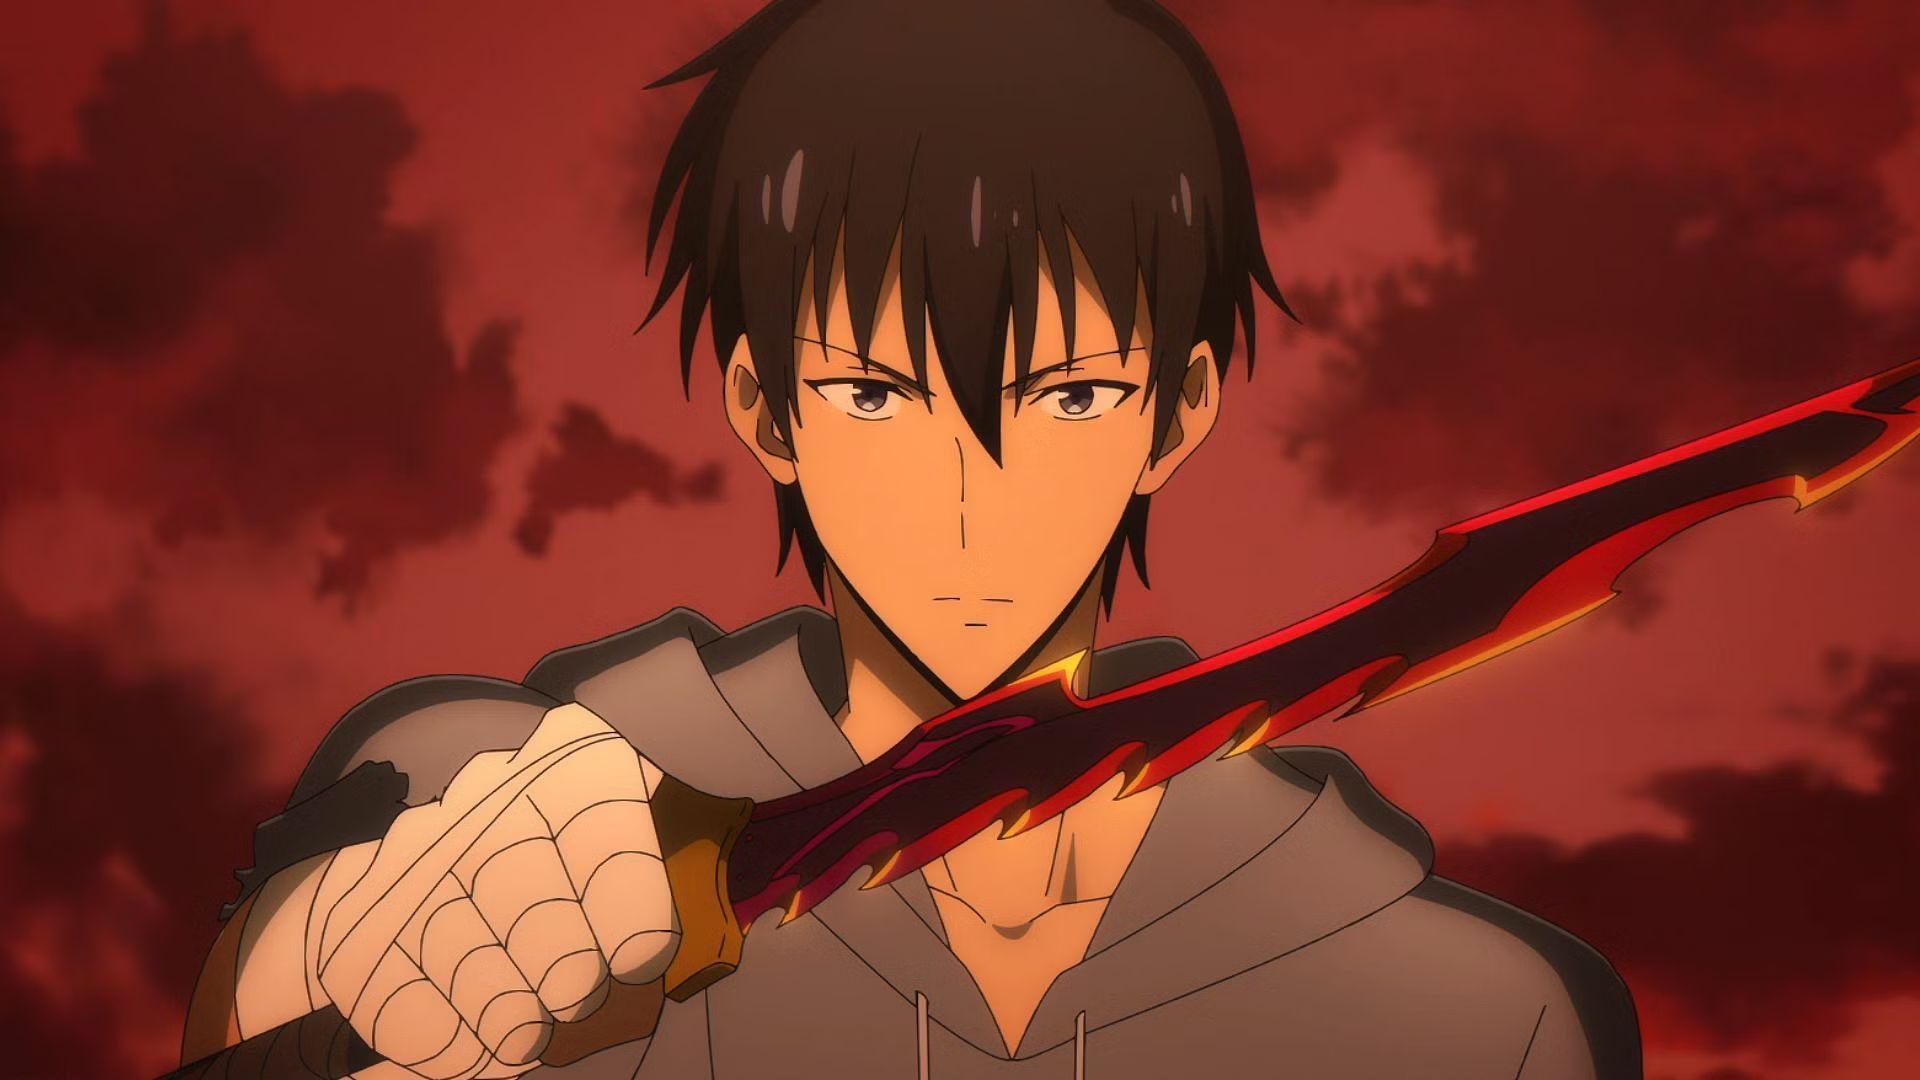 Sung Jinwoo as seen in the anime (image via A-1 Pictures)